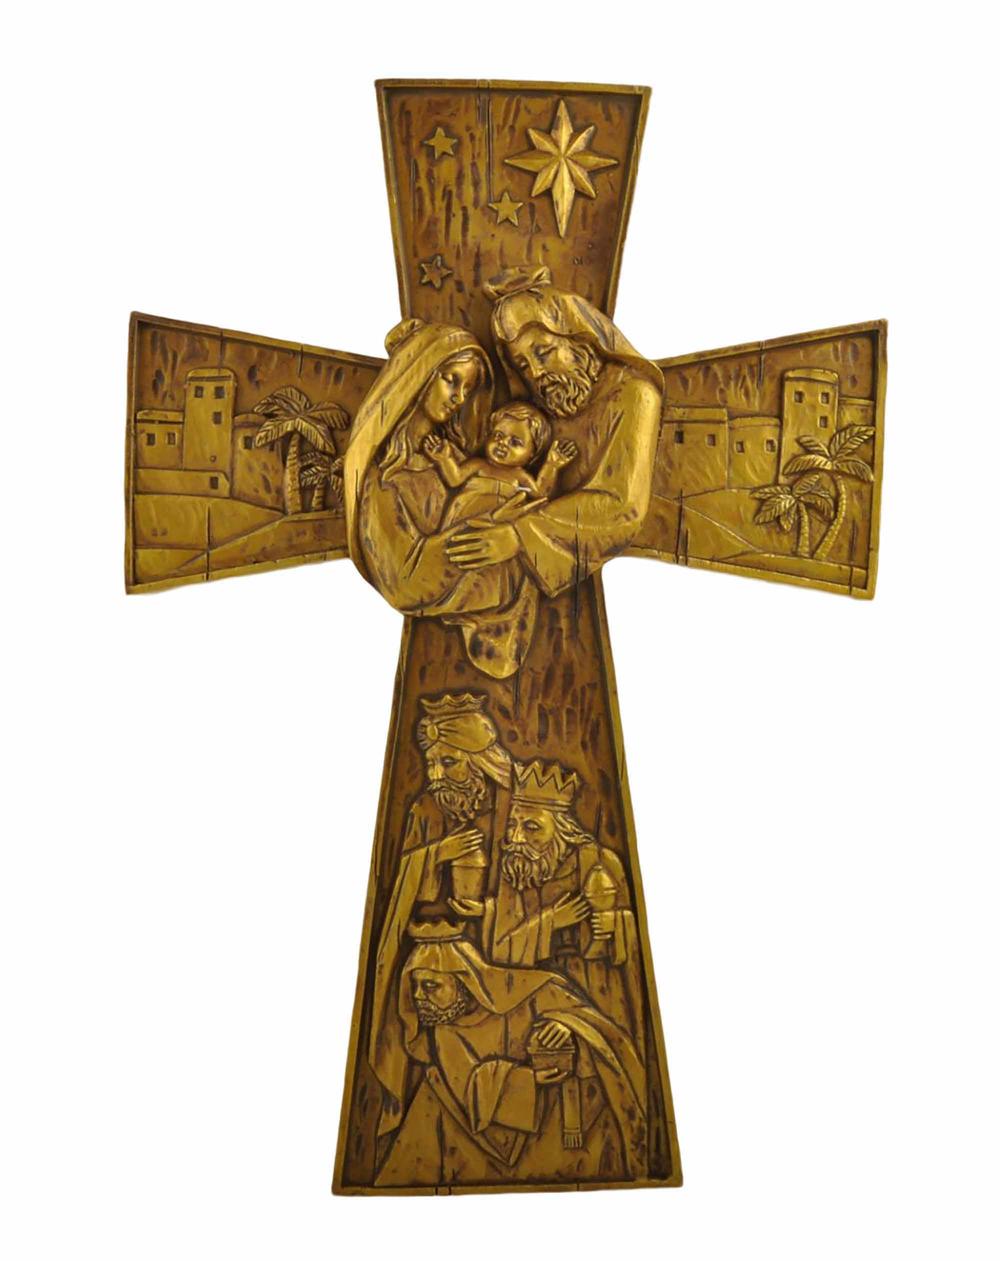 Amazon Hot Sale Wall Decorations,12.8'' Holy Nativity Family Wall Cross-Gold, Tabletop Decorations. 15825